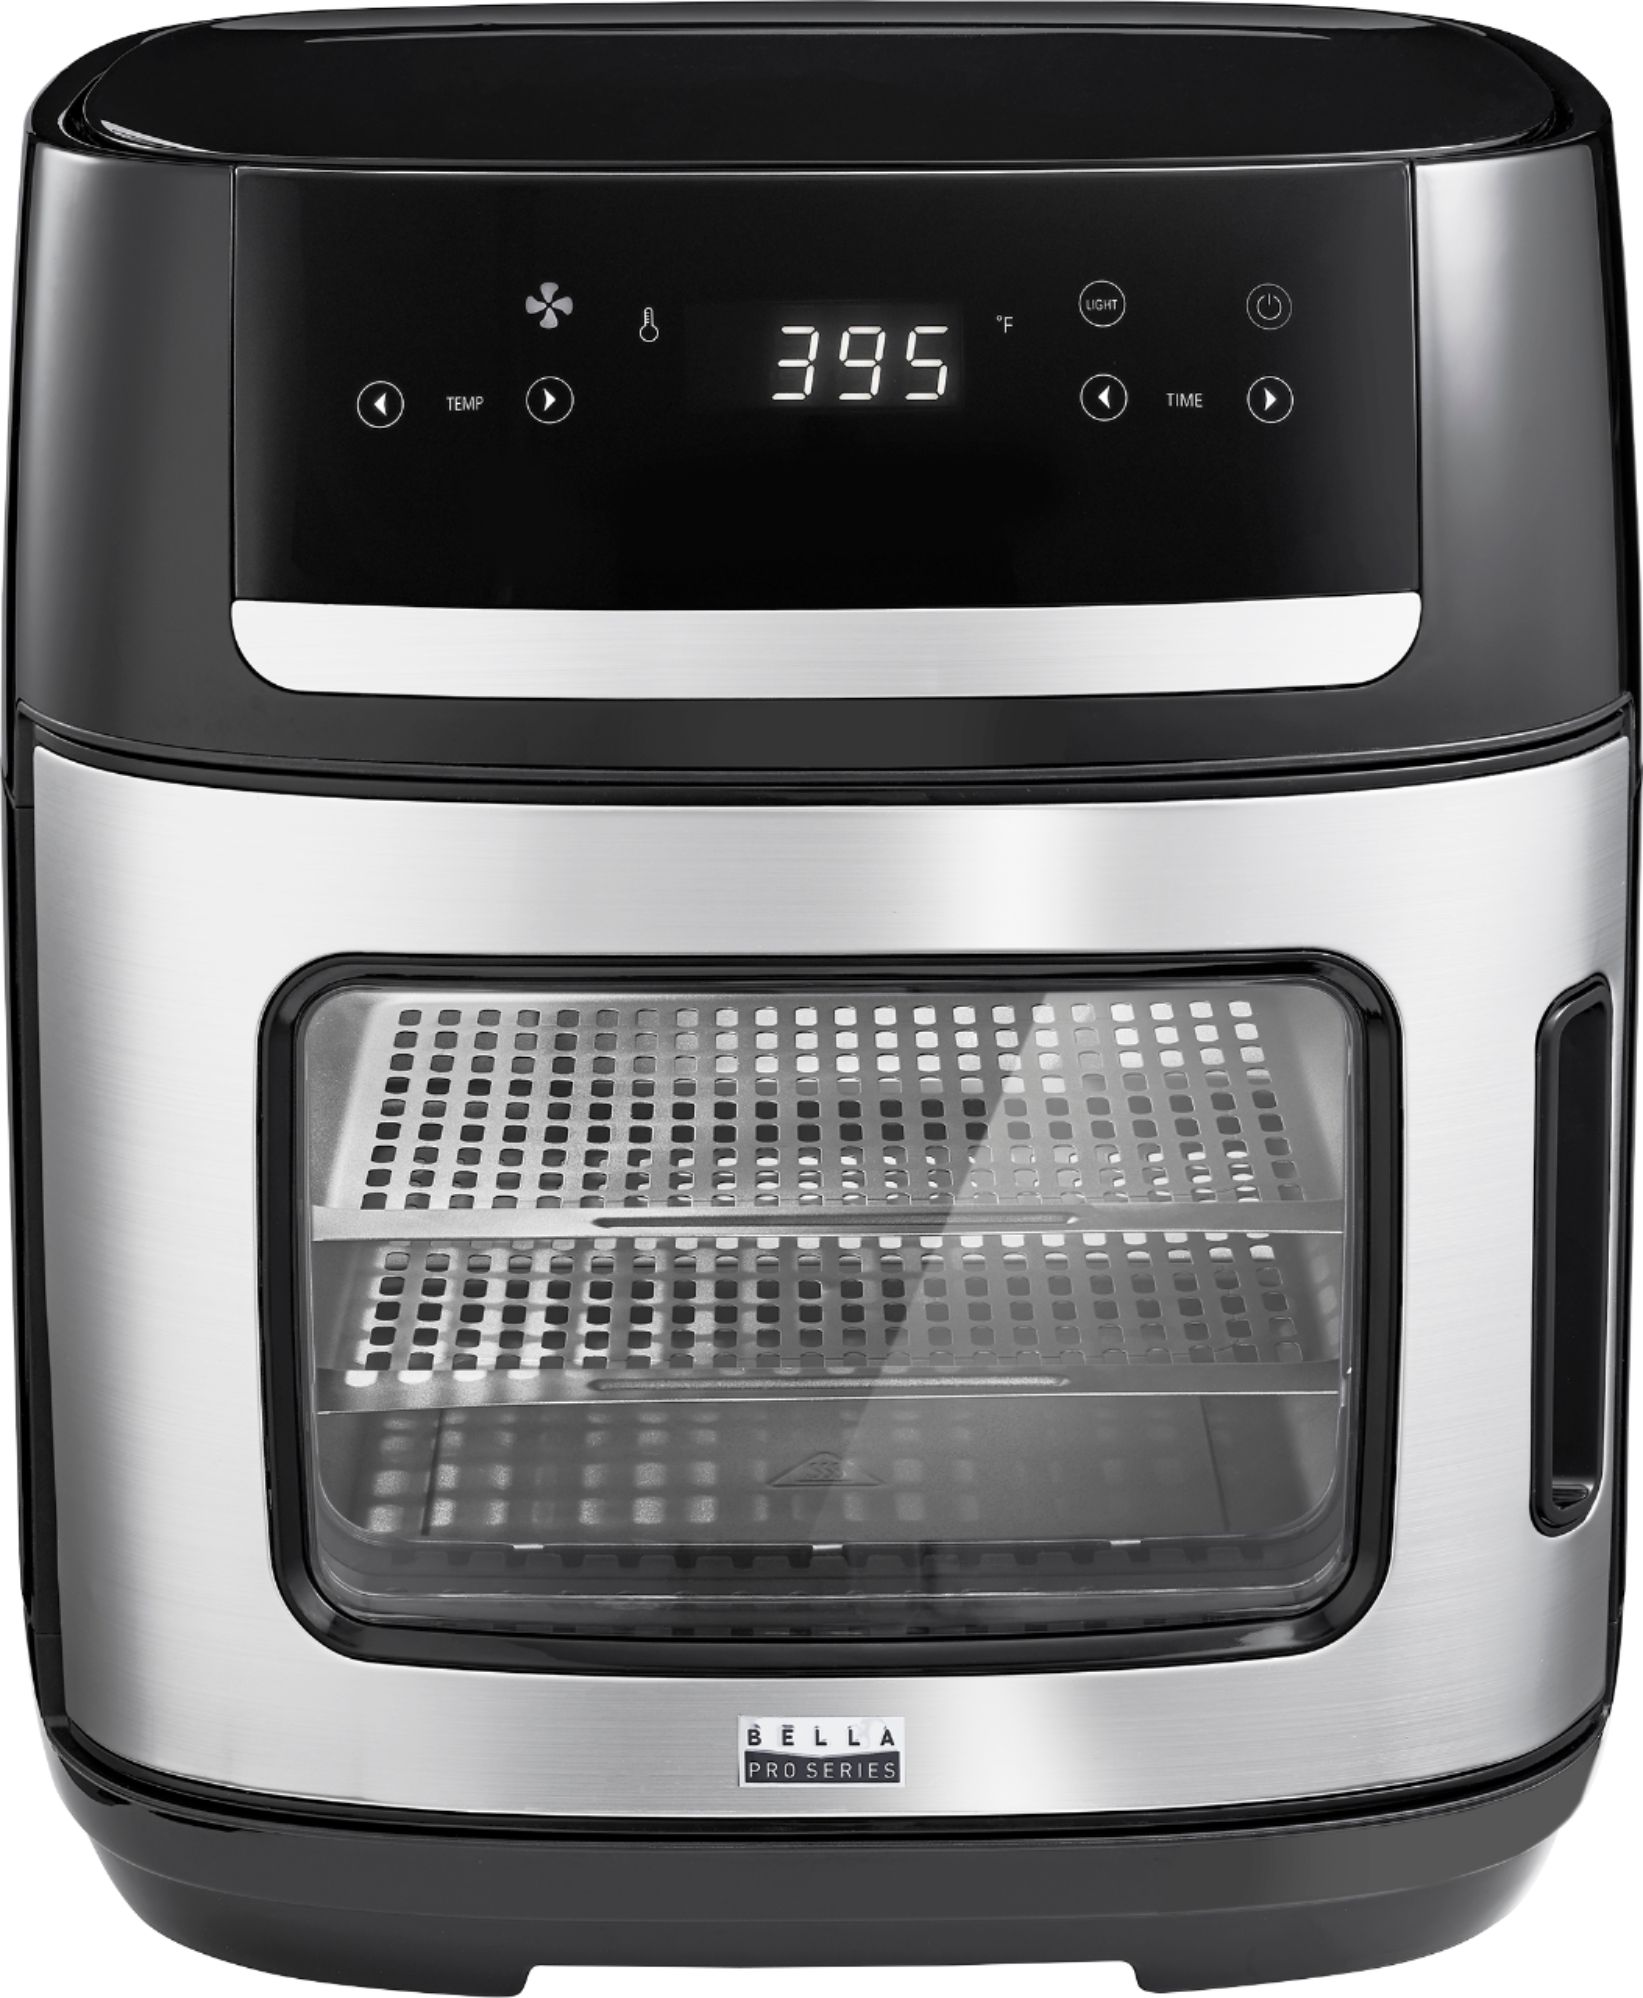 12.6 qt Bella Pro Convection Toaster Oven + Air Fryer w/ Dehydrator/Rotisserie Settings $50